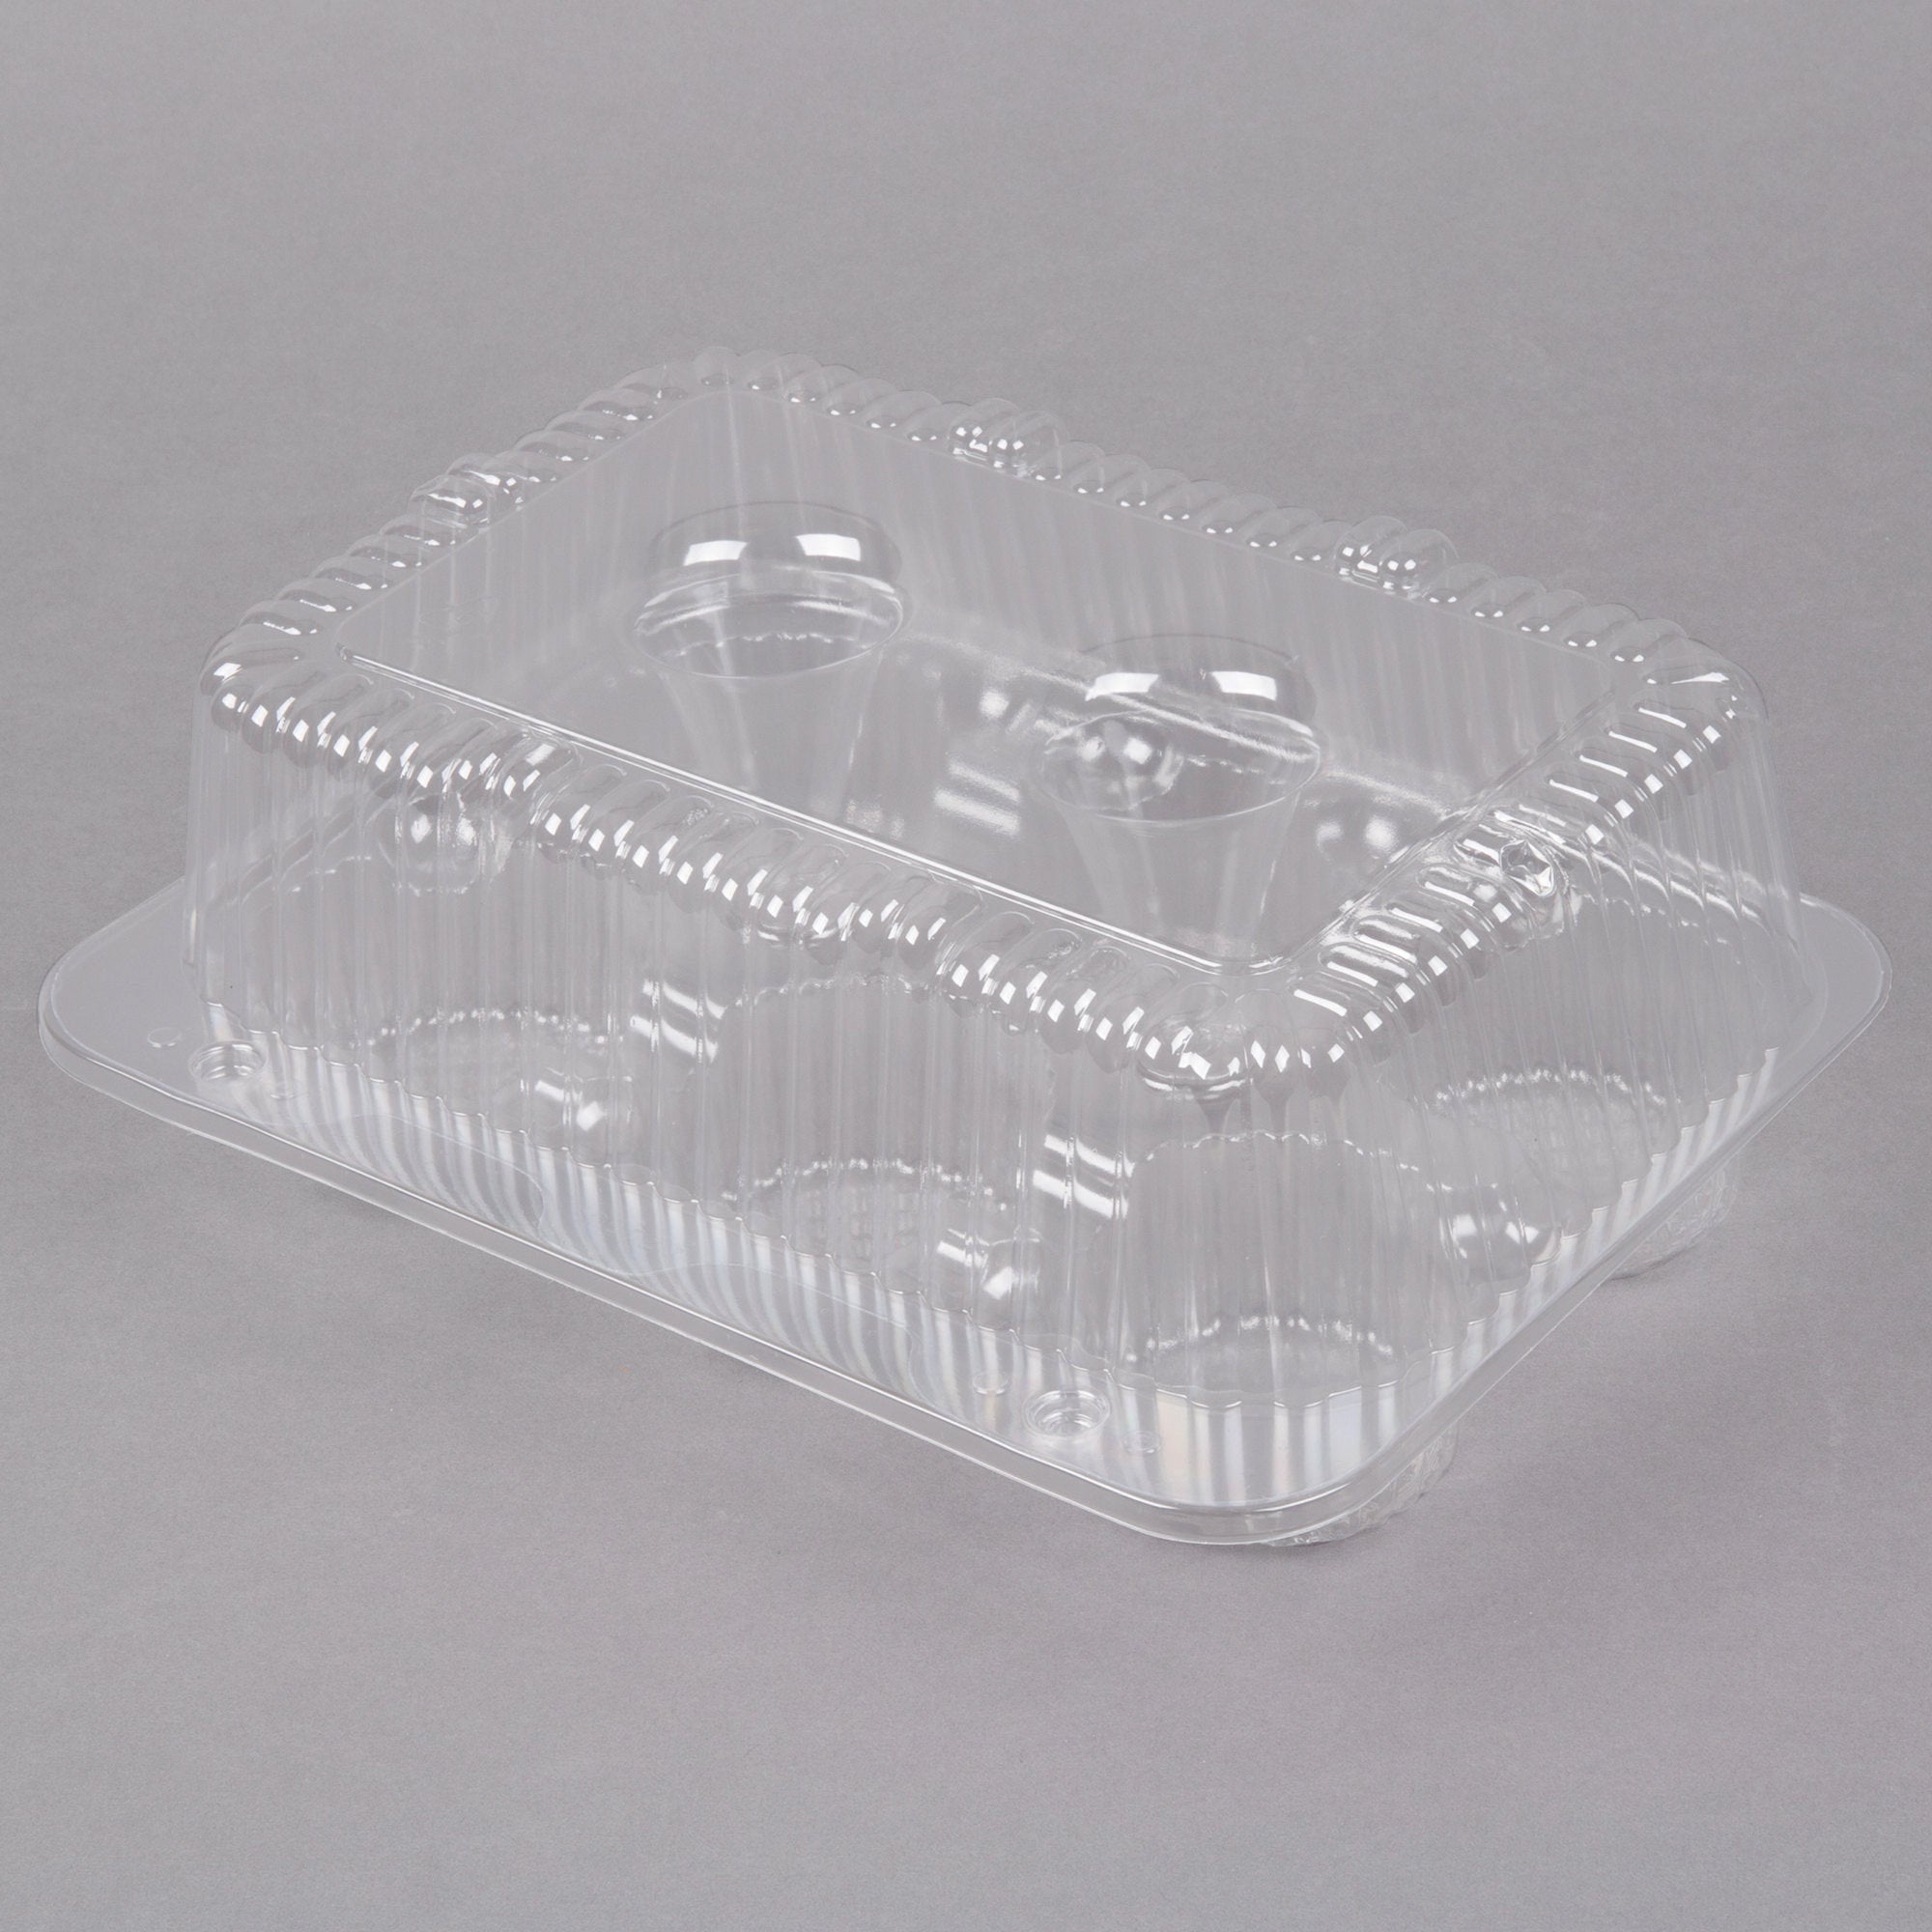 Large Muffin Cupcake Container Plastic with Hinged Lid